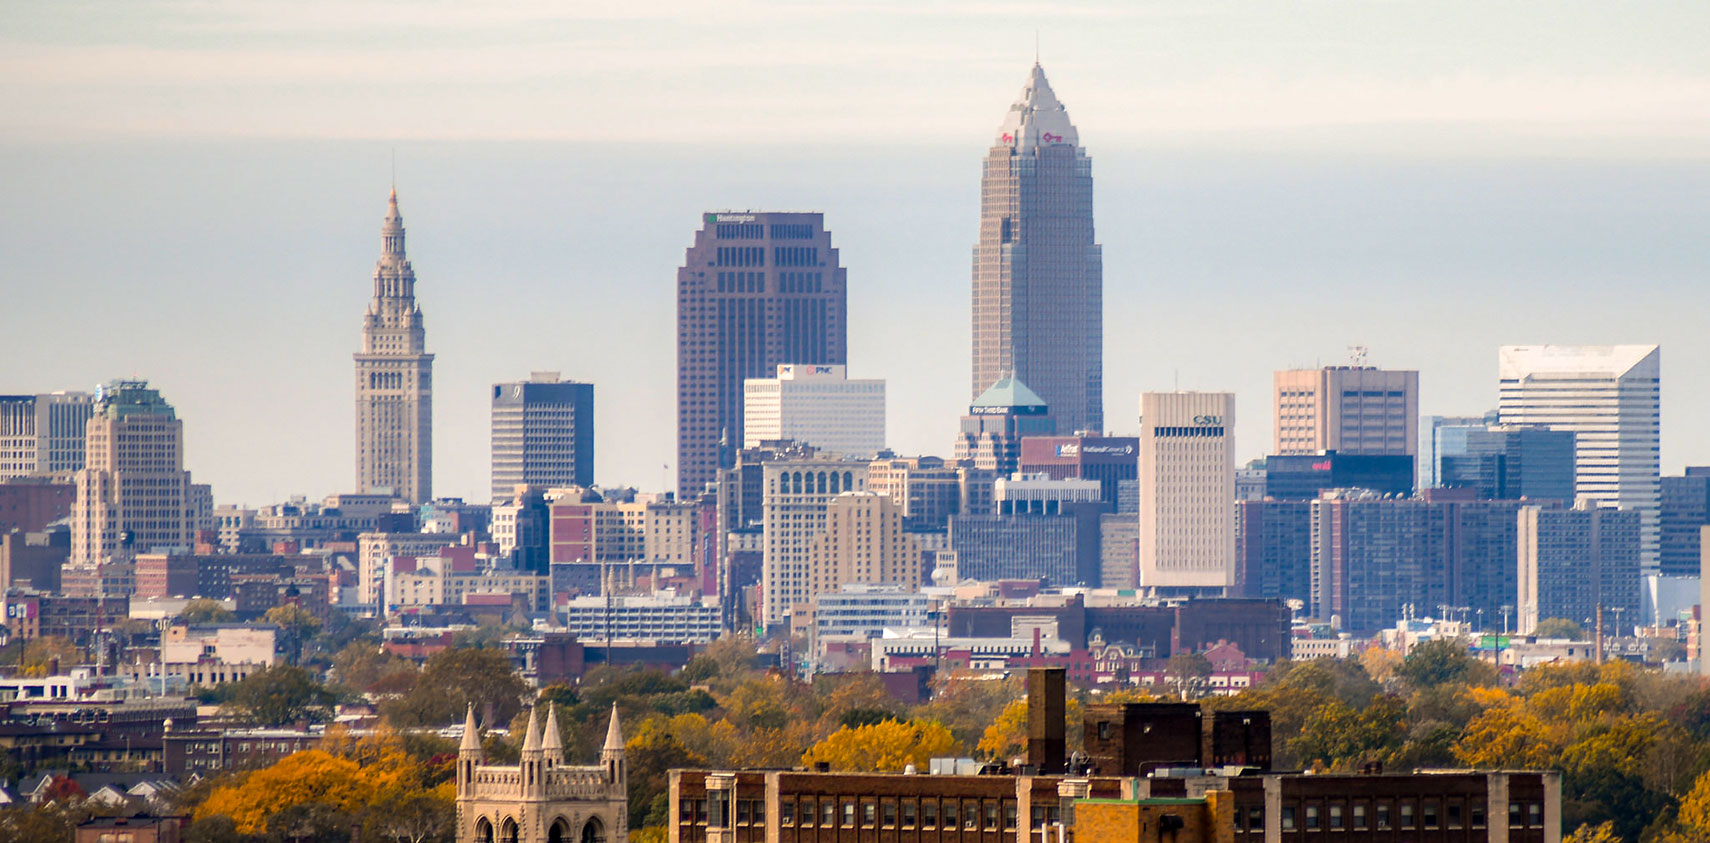 Skyline of Cleveland, Ohio with Terminal Tower